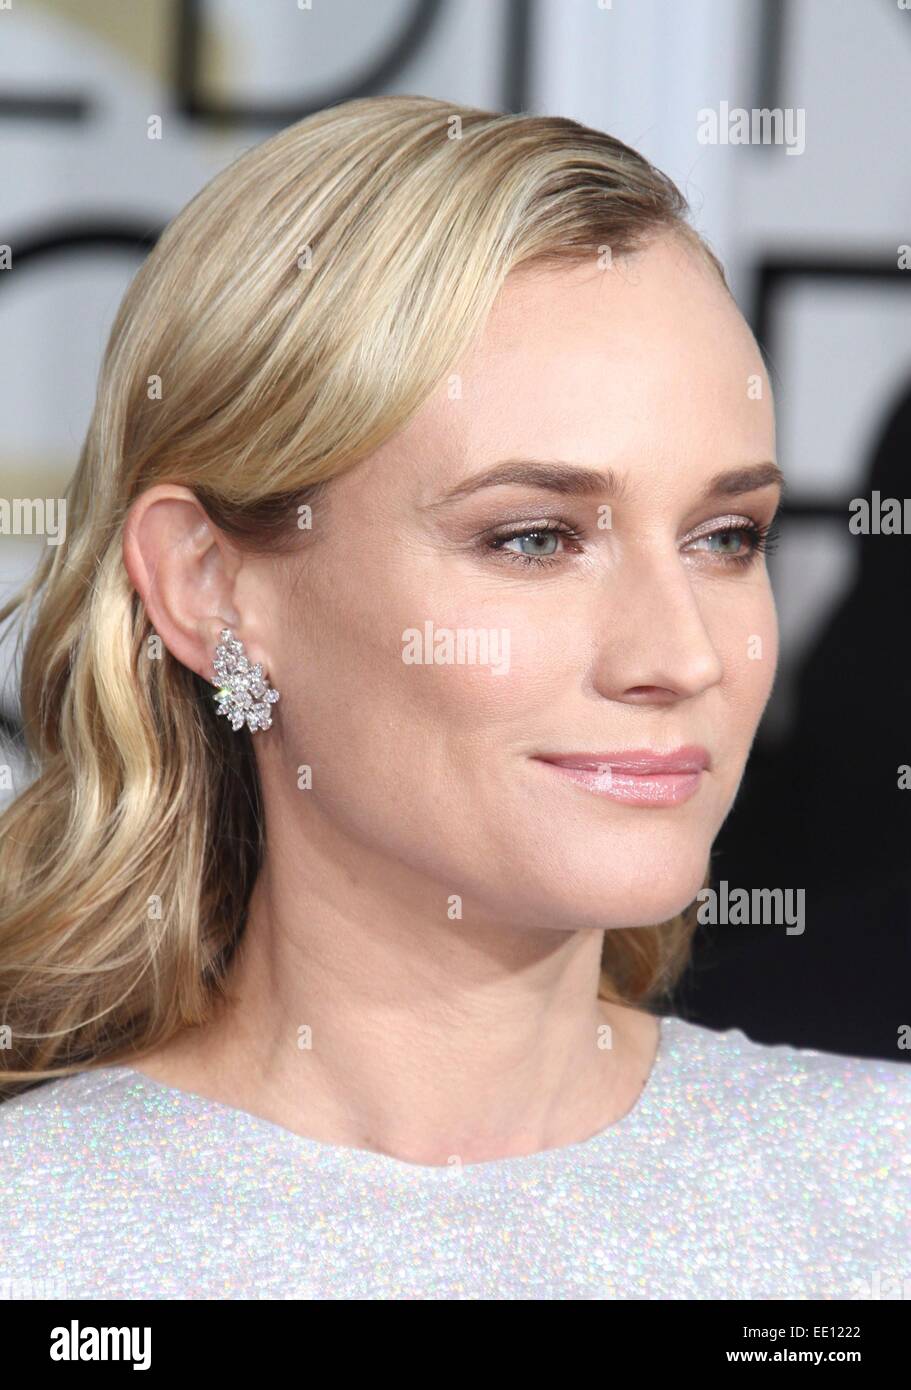 Beverly Hills, CA. 11th Jan, 2015. Diane Kruger at arrivals for The 72nd Annual Golden Globe Awards 2015 - Part 3, The Beverly Hilton Hotel, Beverly Hills, CA January 11, 2015. © Charlie Williams/Everett Collection/Alamy Live News Stock Photo